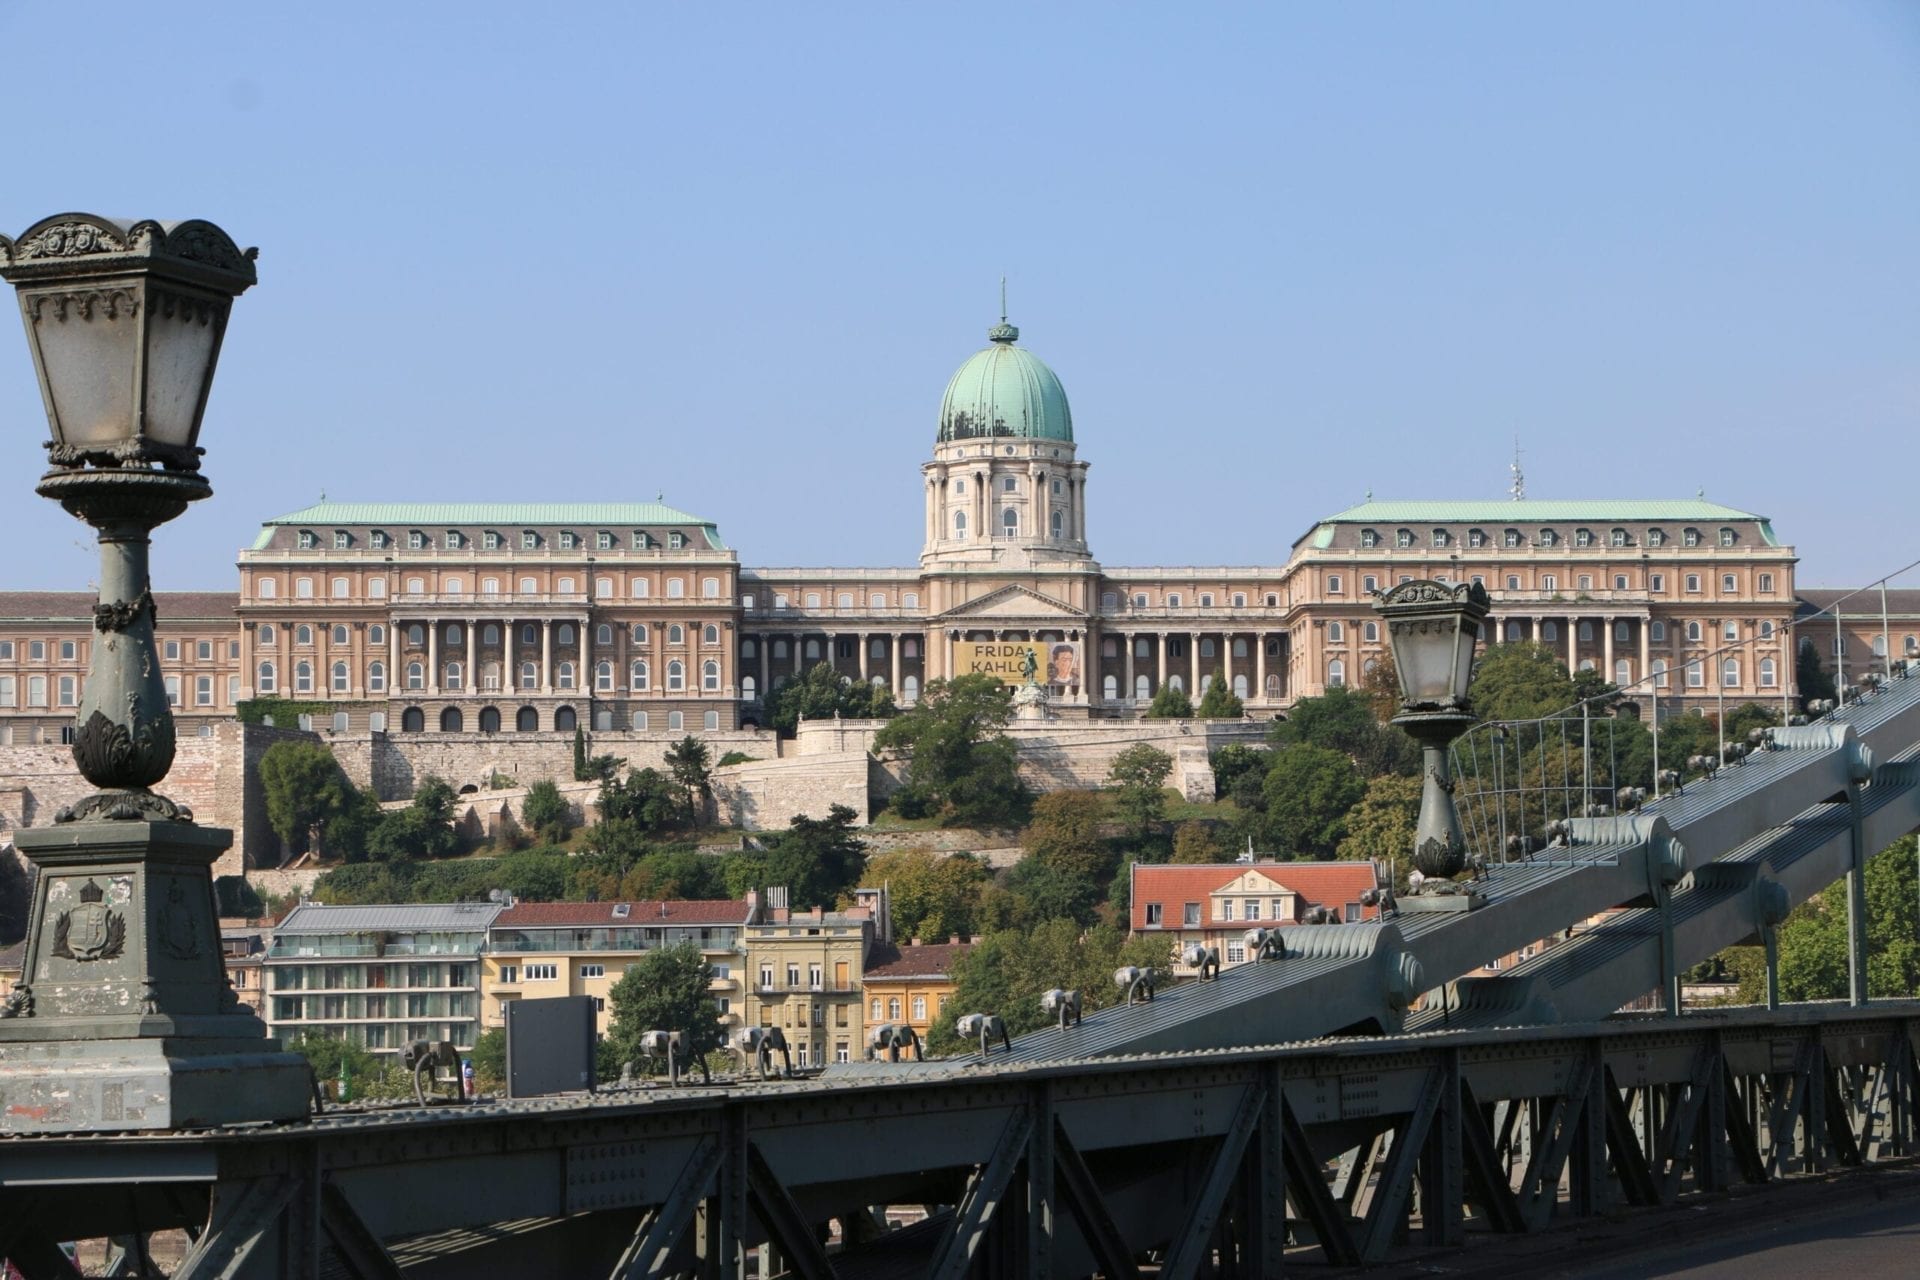 Buda Castle, a stop on this self-guided walking tour of Budapest